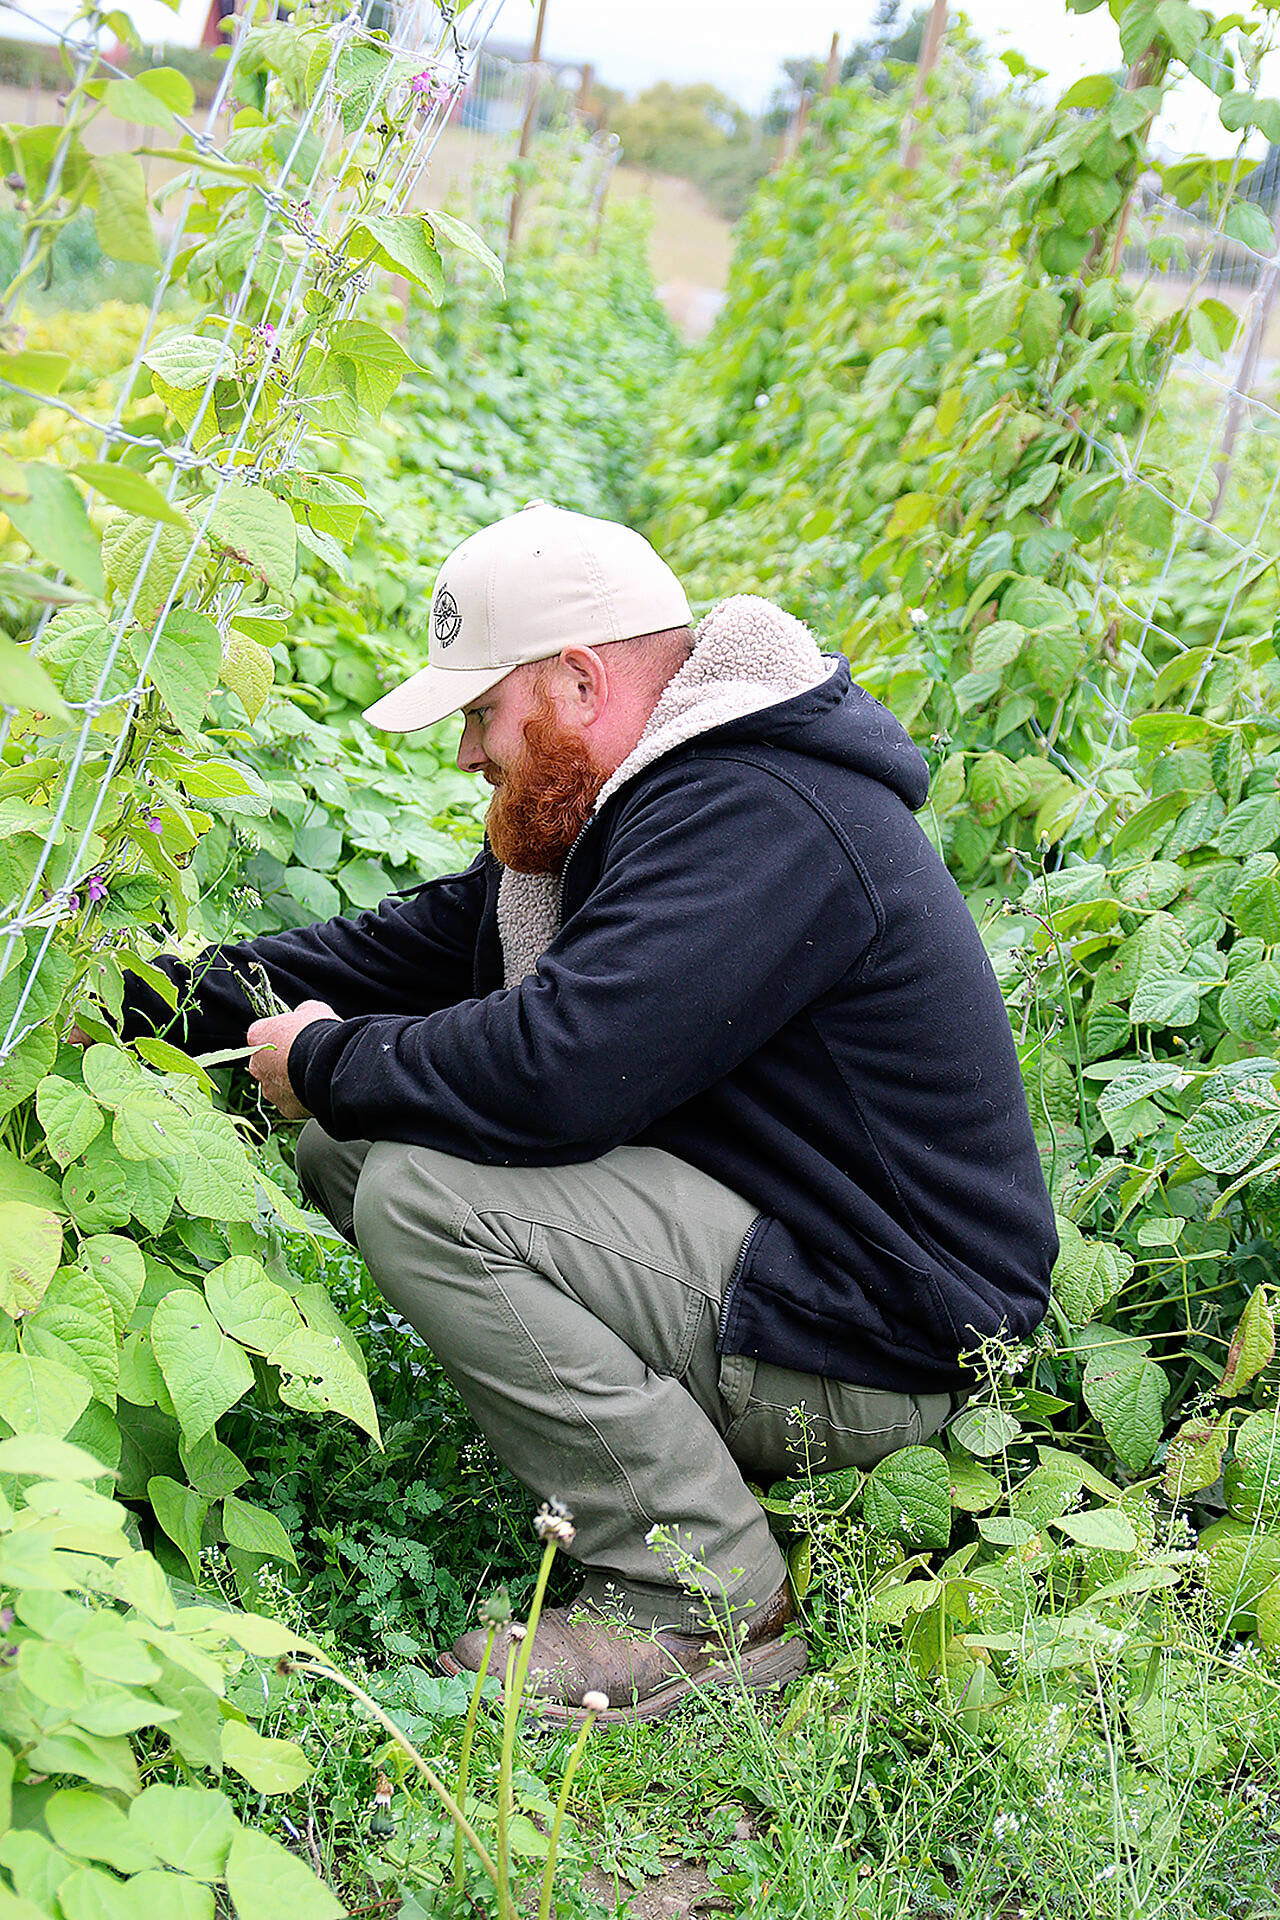 In this 2018 photo, Kyle Flack of Bell’s Farm harvests beans from the garden. (Laura Guido / Whidbey News Group file)